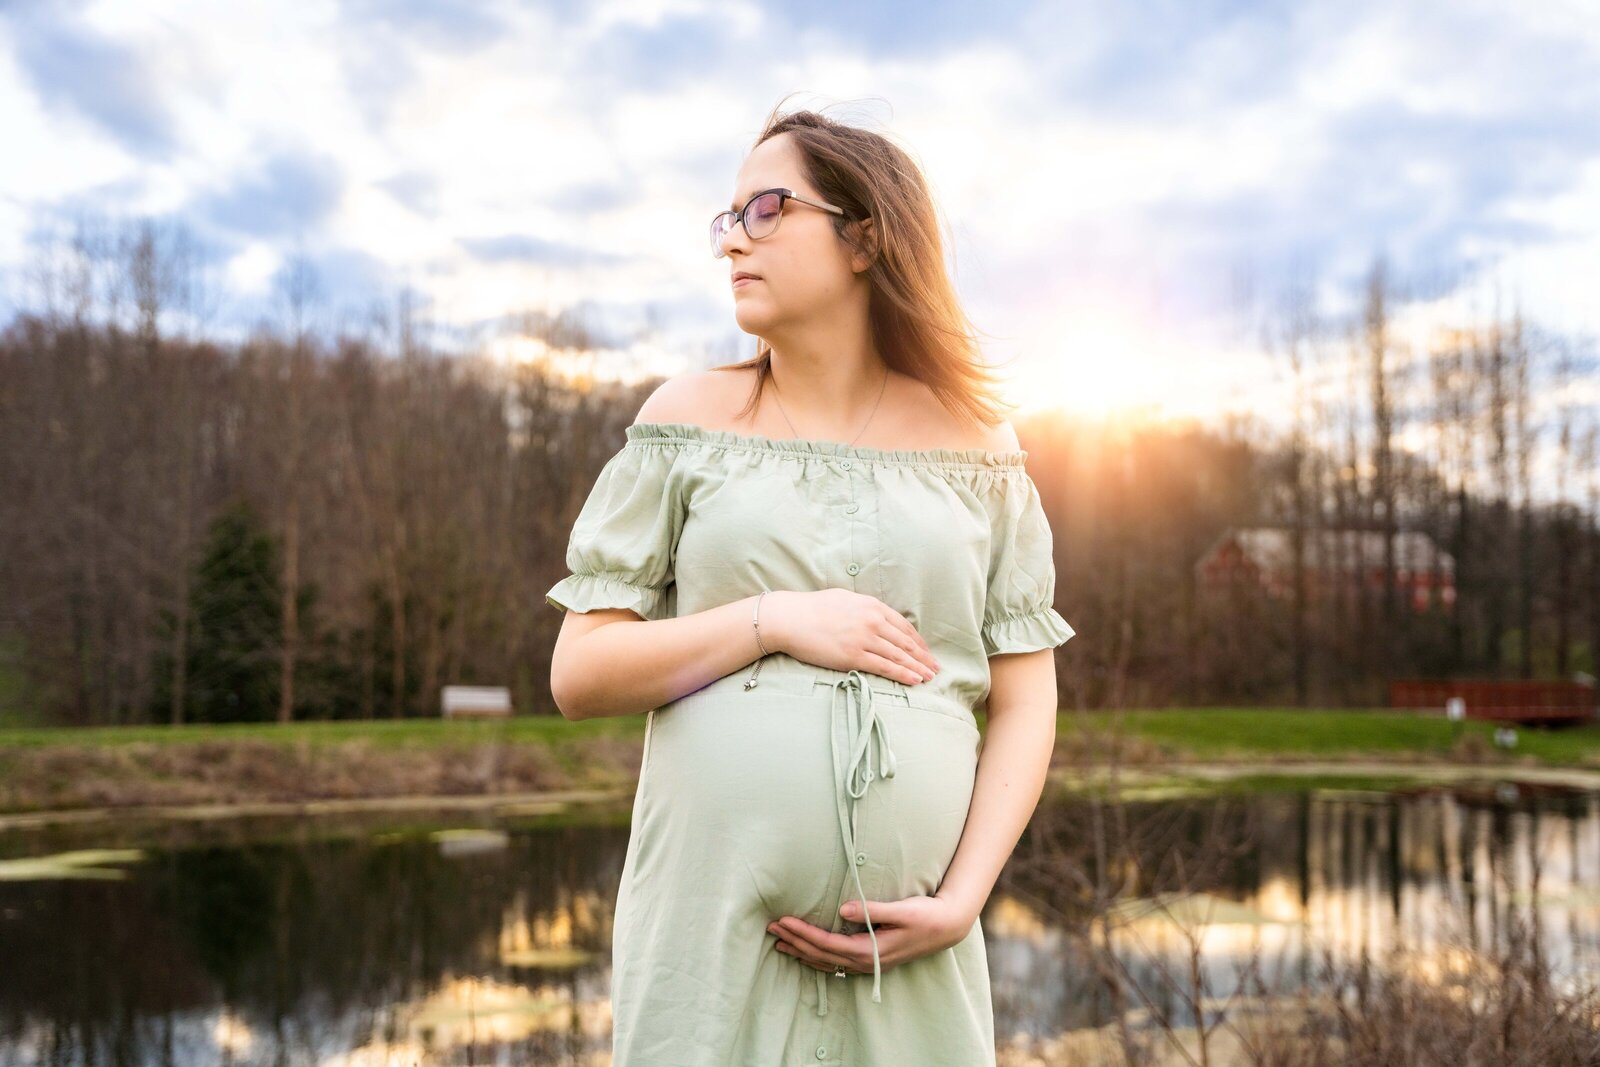 Maternity photos at Norma Johnson Center in Dover, Ohio. Photographer Demi Fowler owner of Blissfully Blurred Photography.